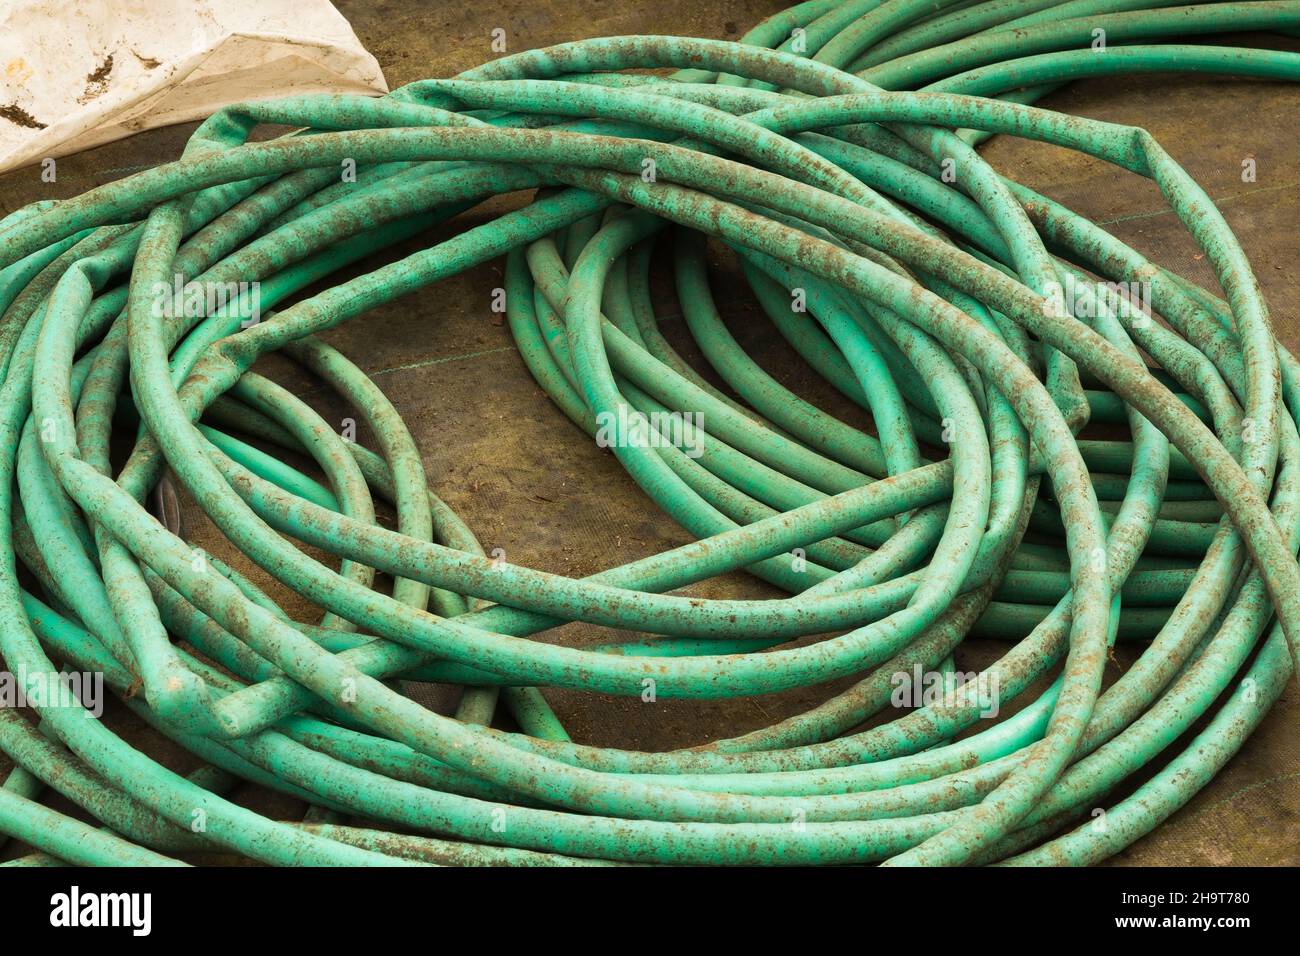 Coiled green rubber garden hoses with kinks. Stock Photo